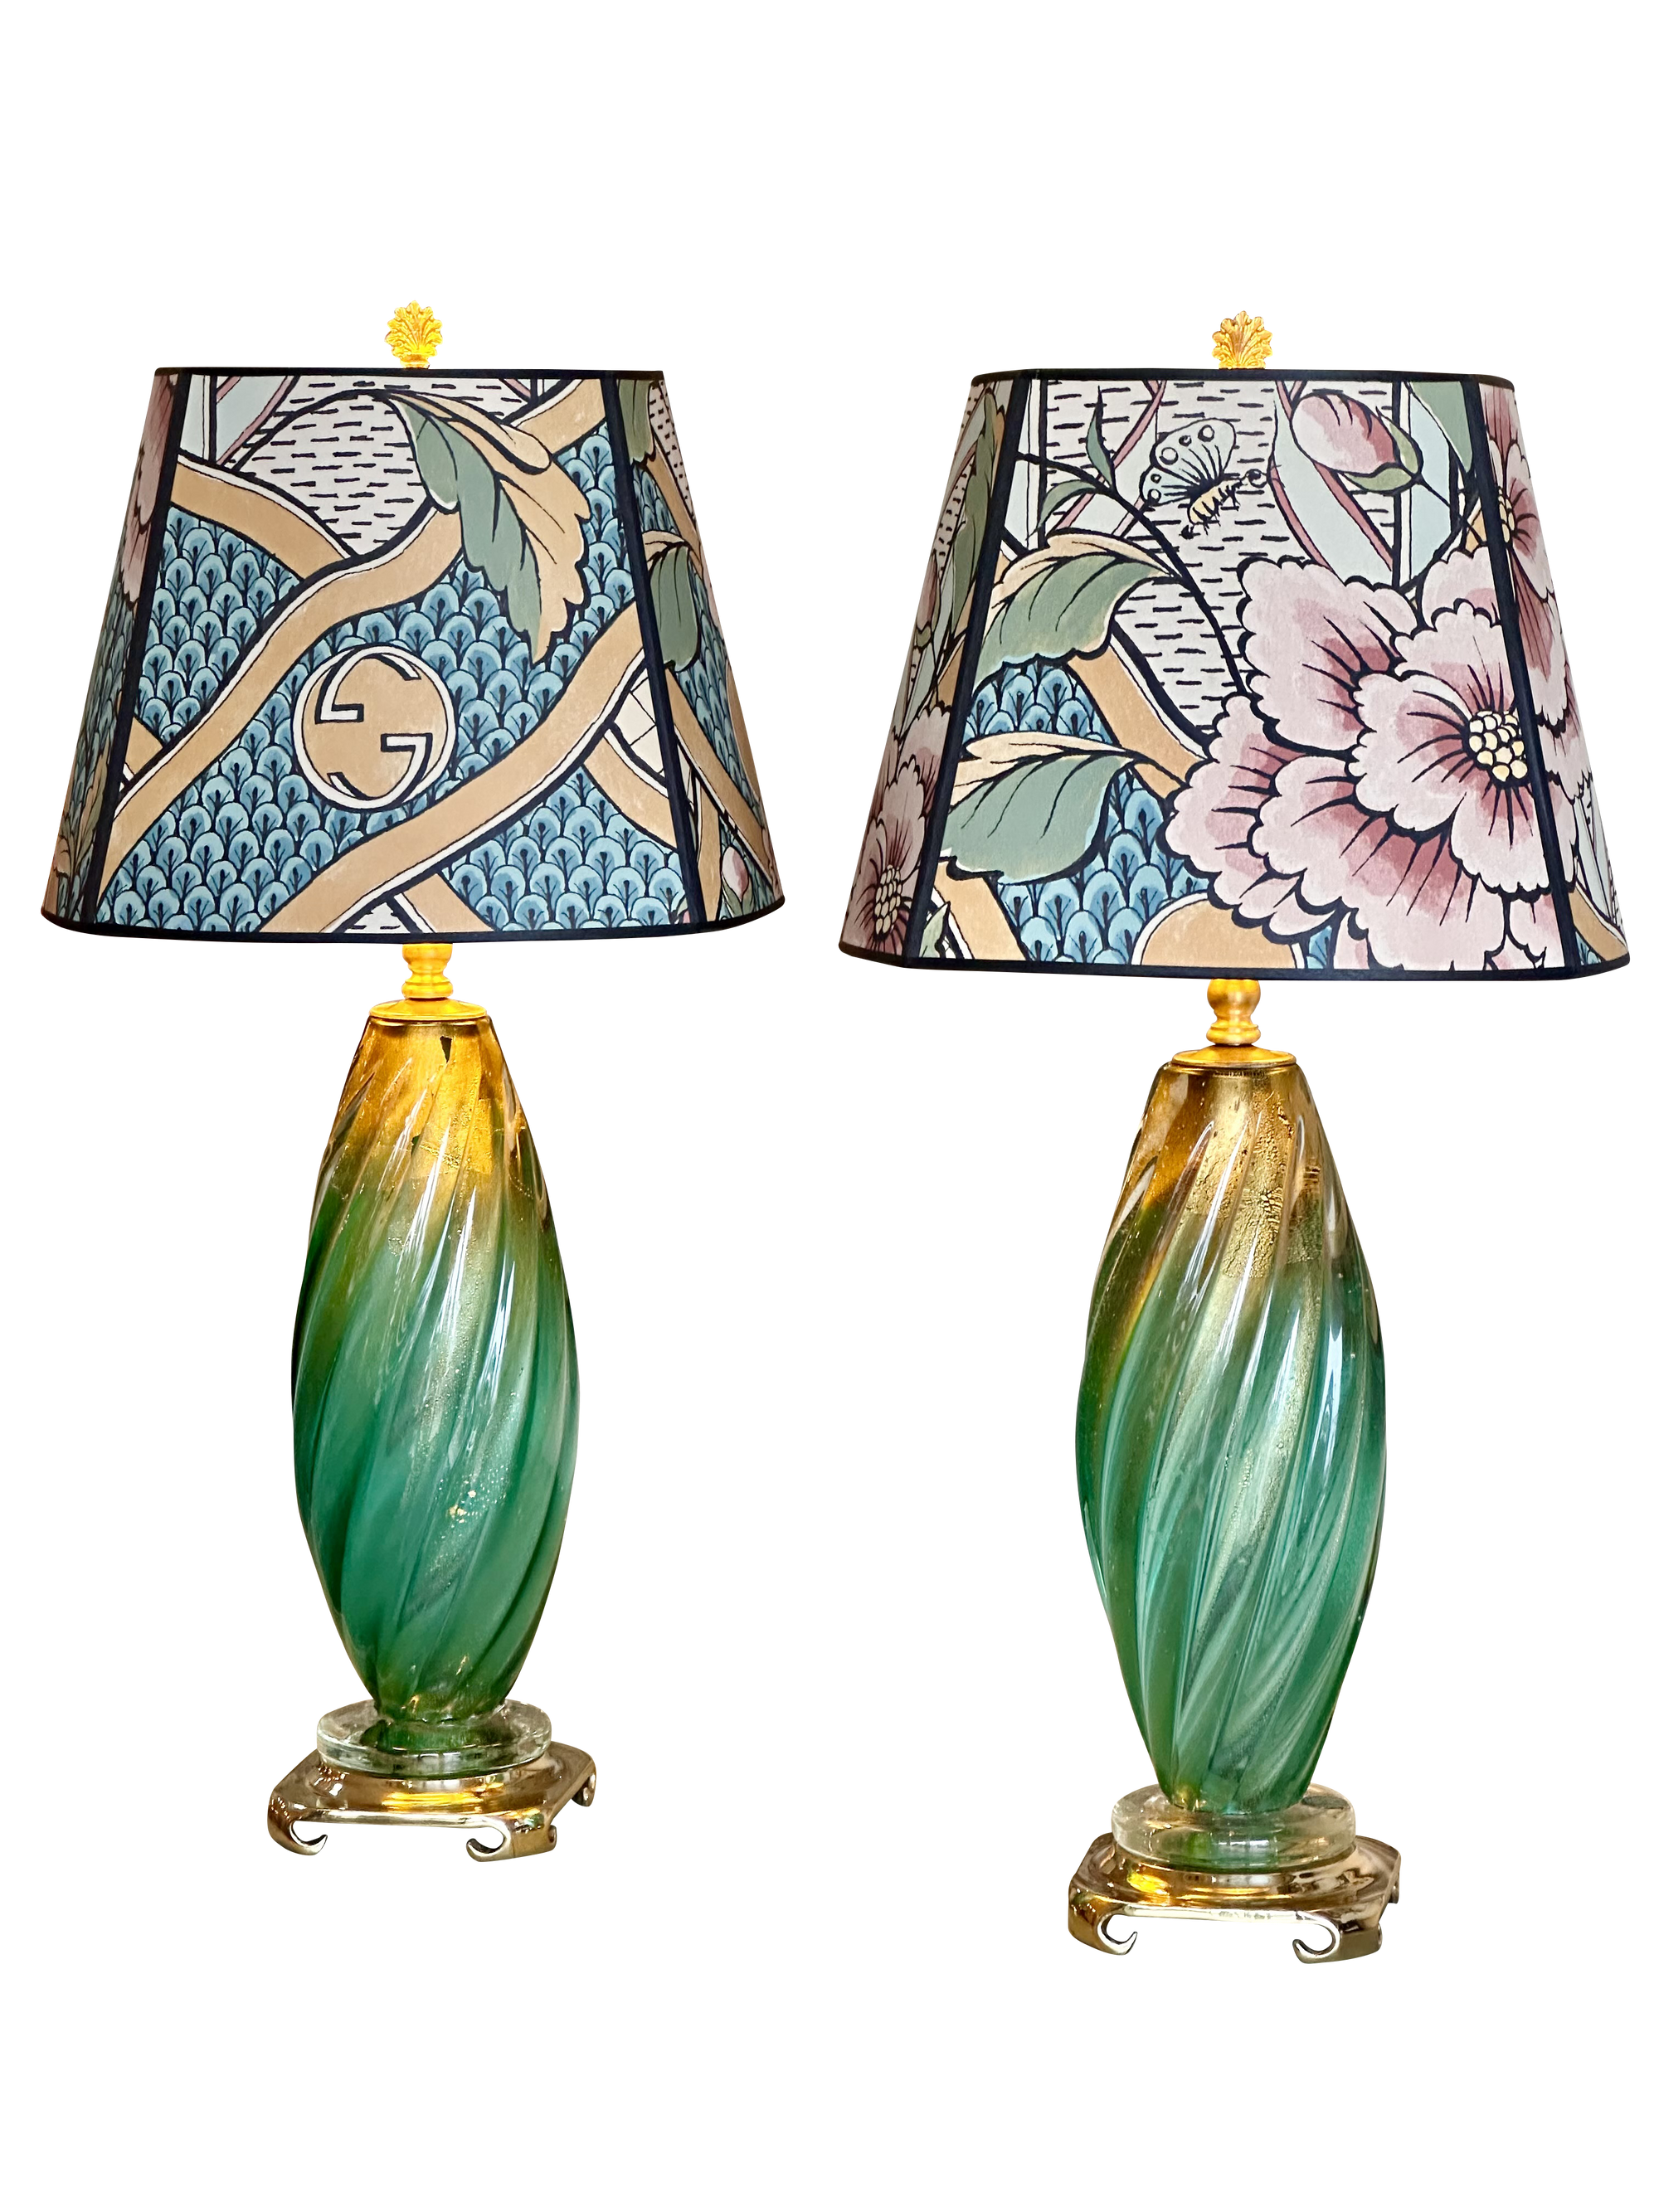 Lovely pair of 1950s Murano Lamps - Green, gold, turquoise